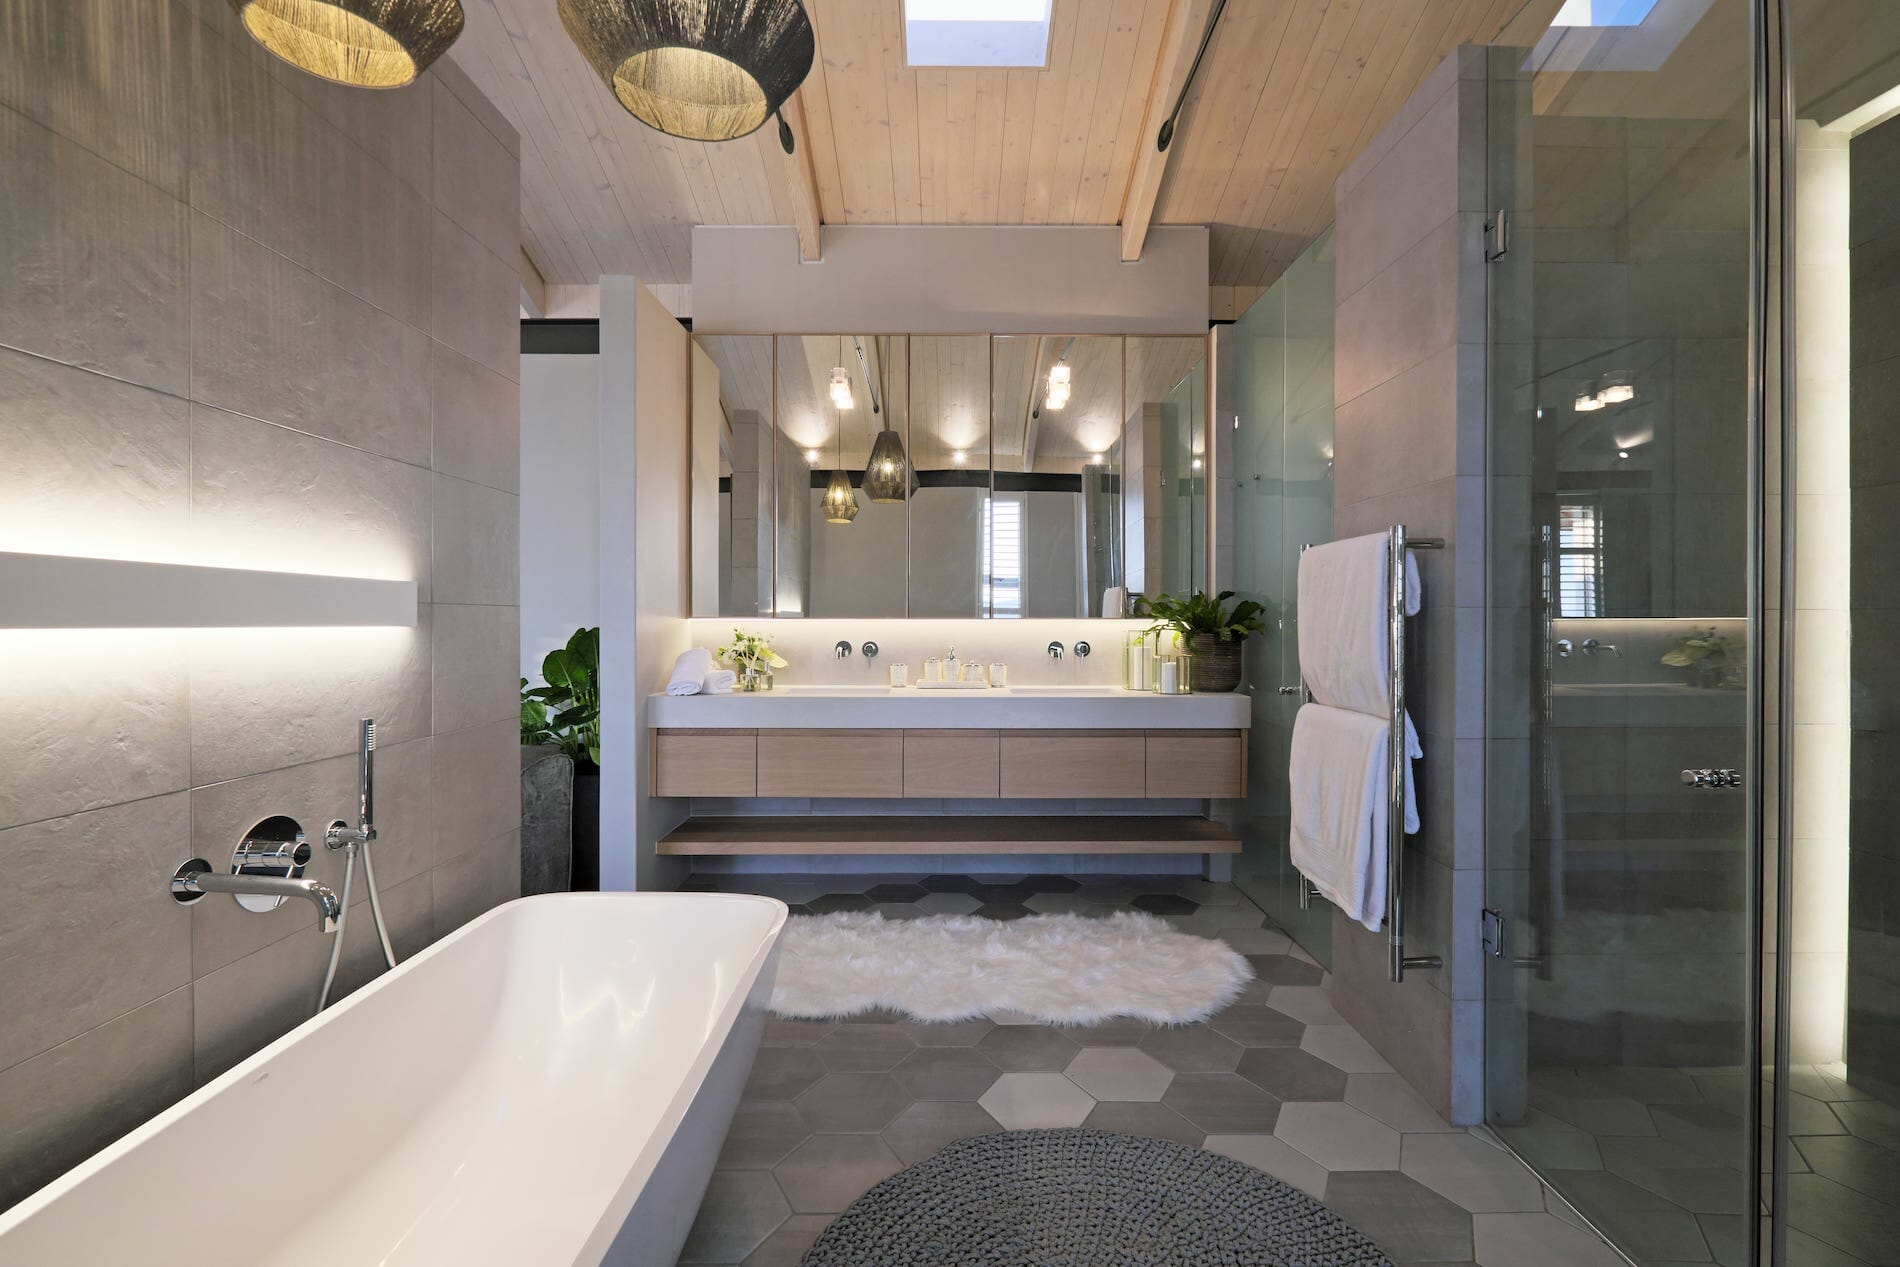 Luxury Interiors South Africa - The Excellence Group Bathroom Inspiration Caoe Town Spotlight2